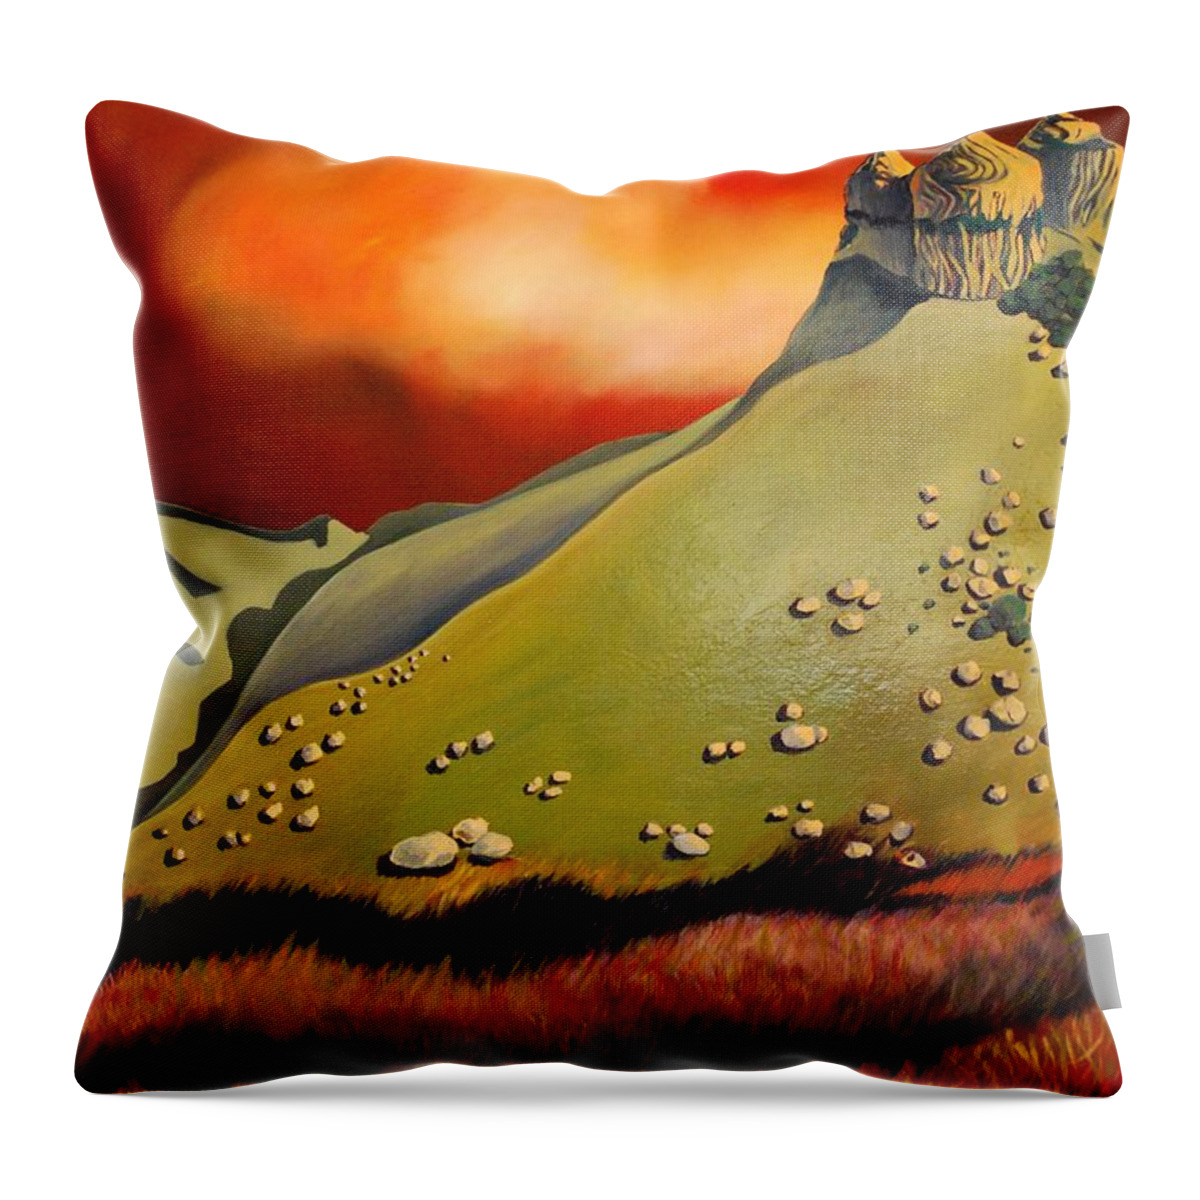 Hills Throw Pillow featuring the painting Soft Hills by Franci Hepburn